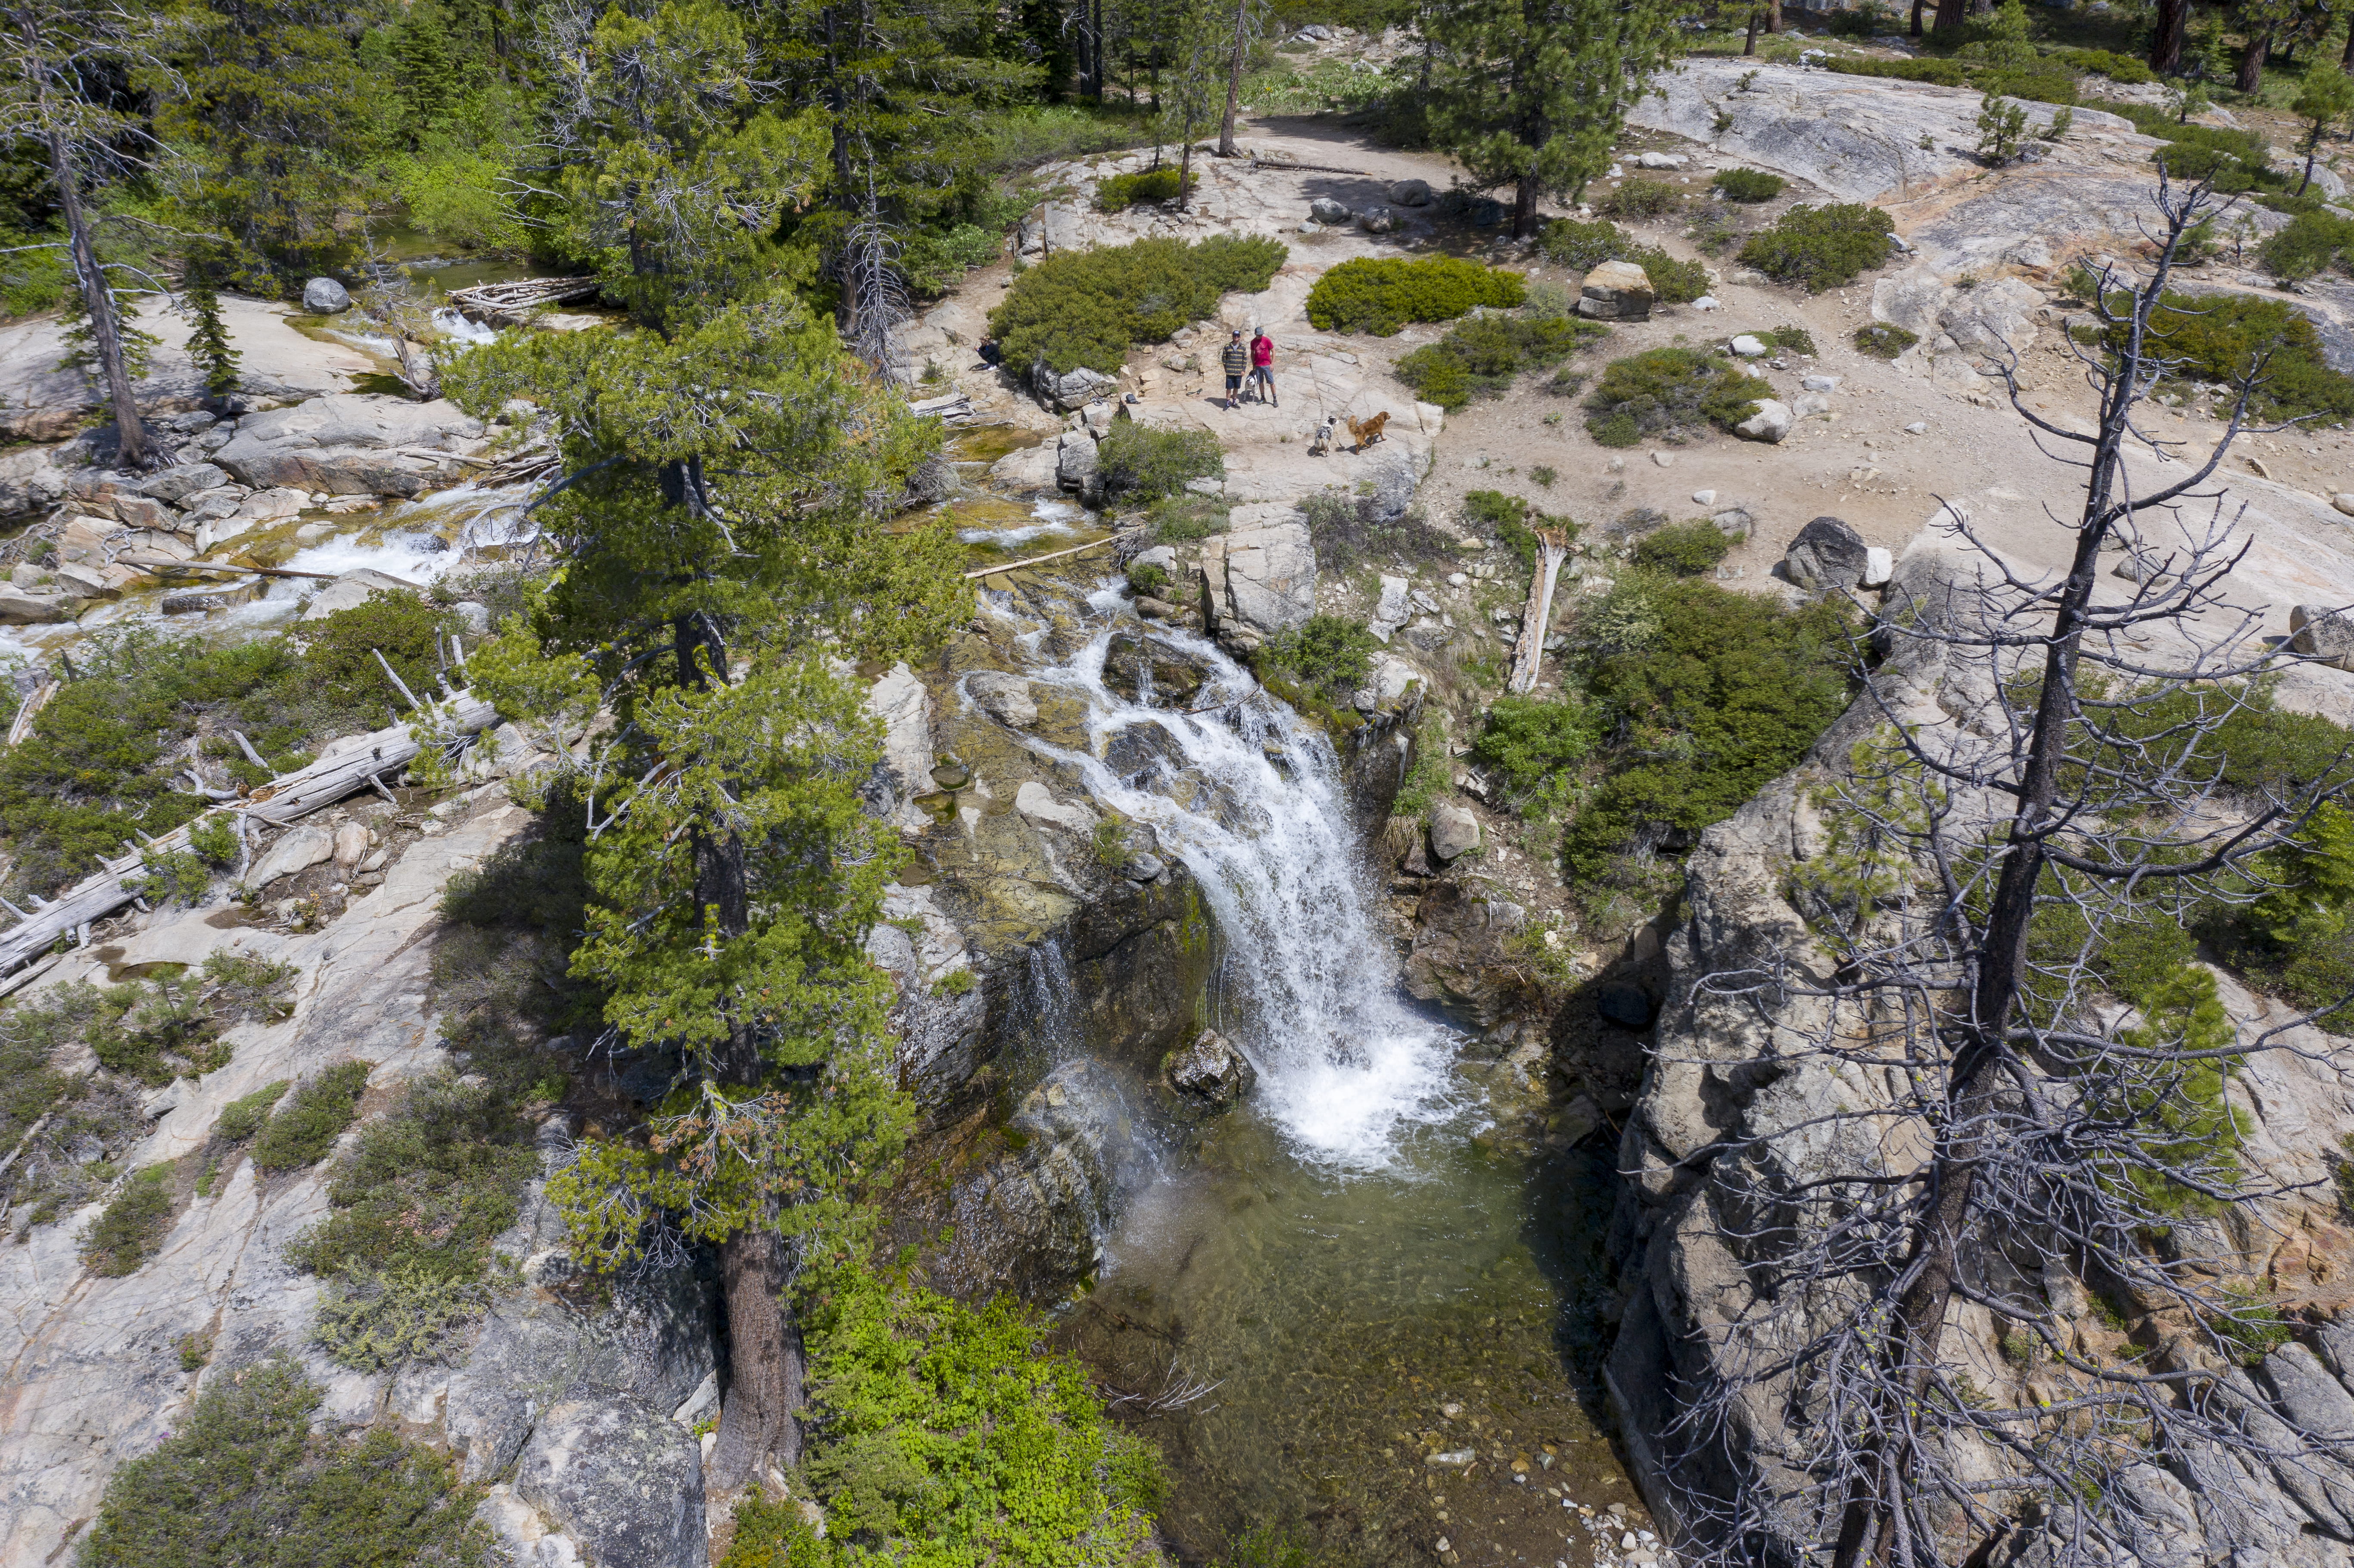 A photograph of two hikers with two dogs standing next to a waterfall on Shirley Canyon Trail.